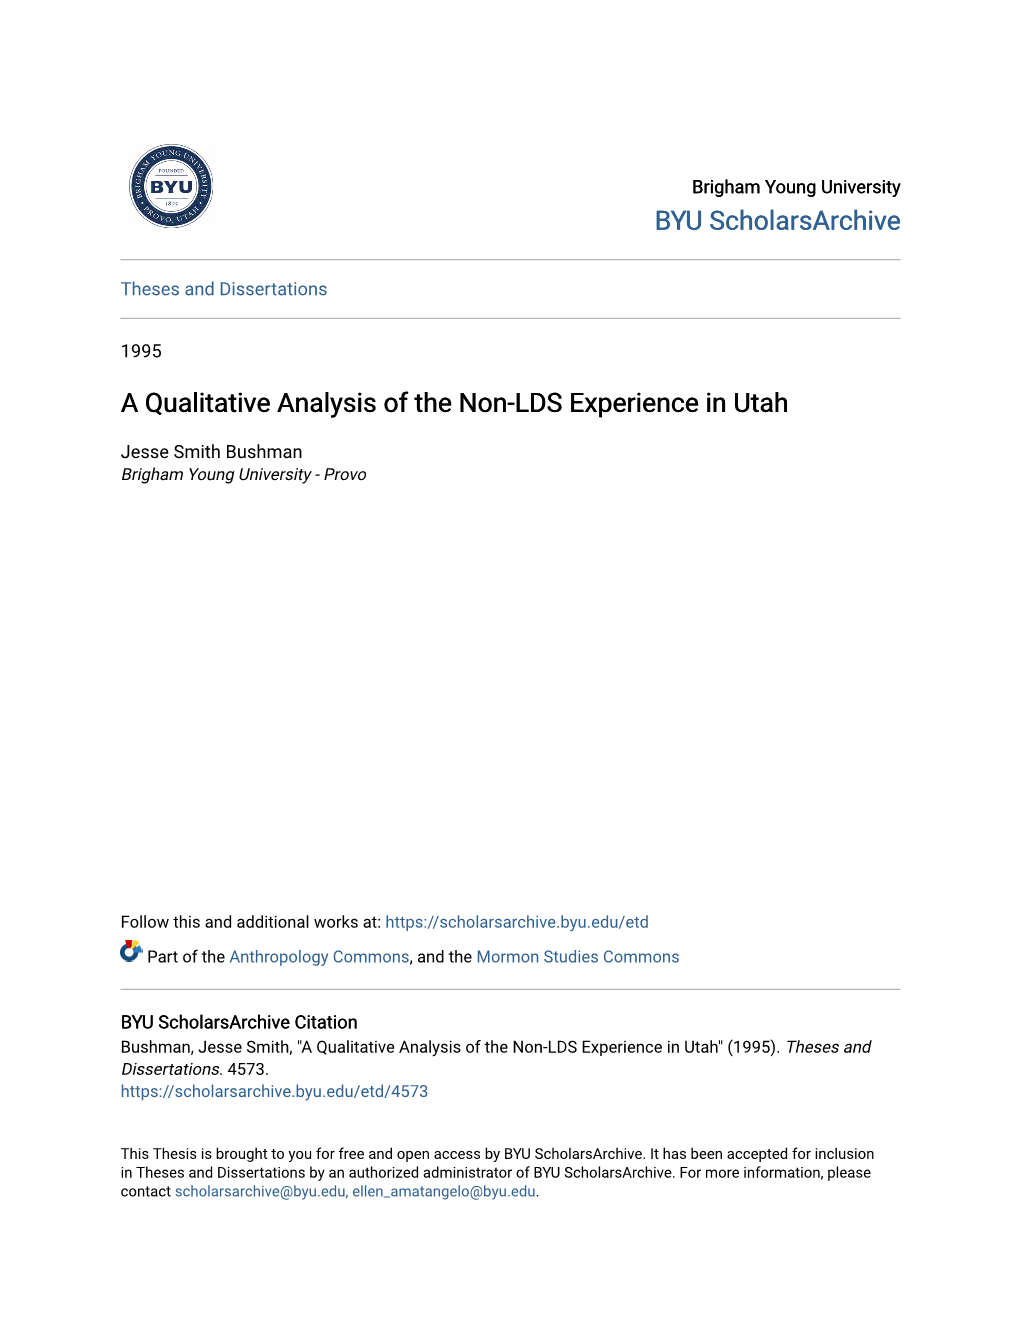 A Qualitative Analysis of the Non-LDS Experience in Utah